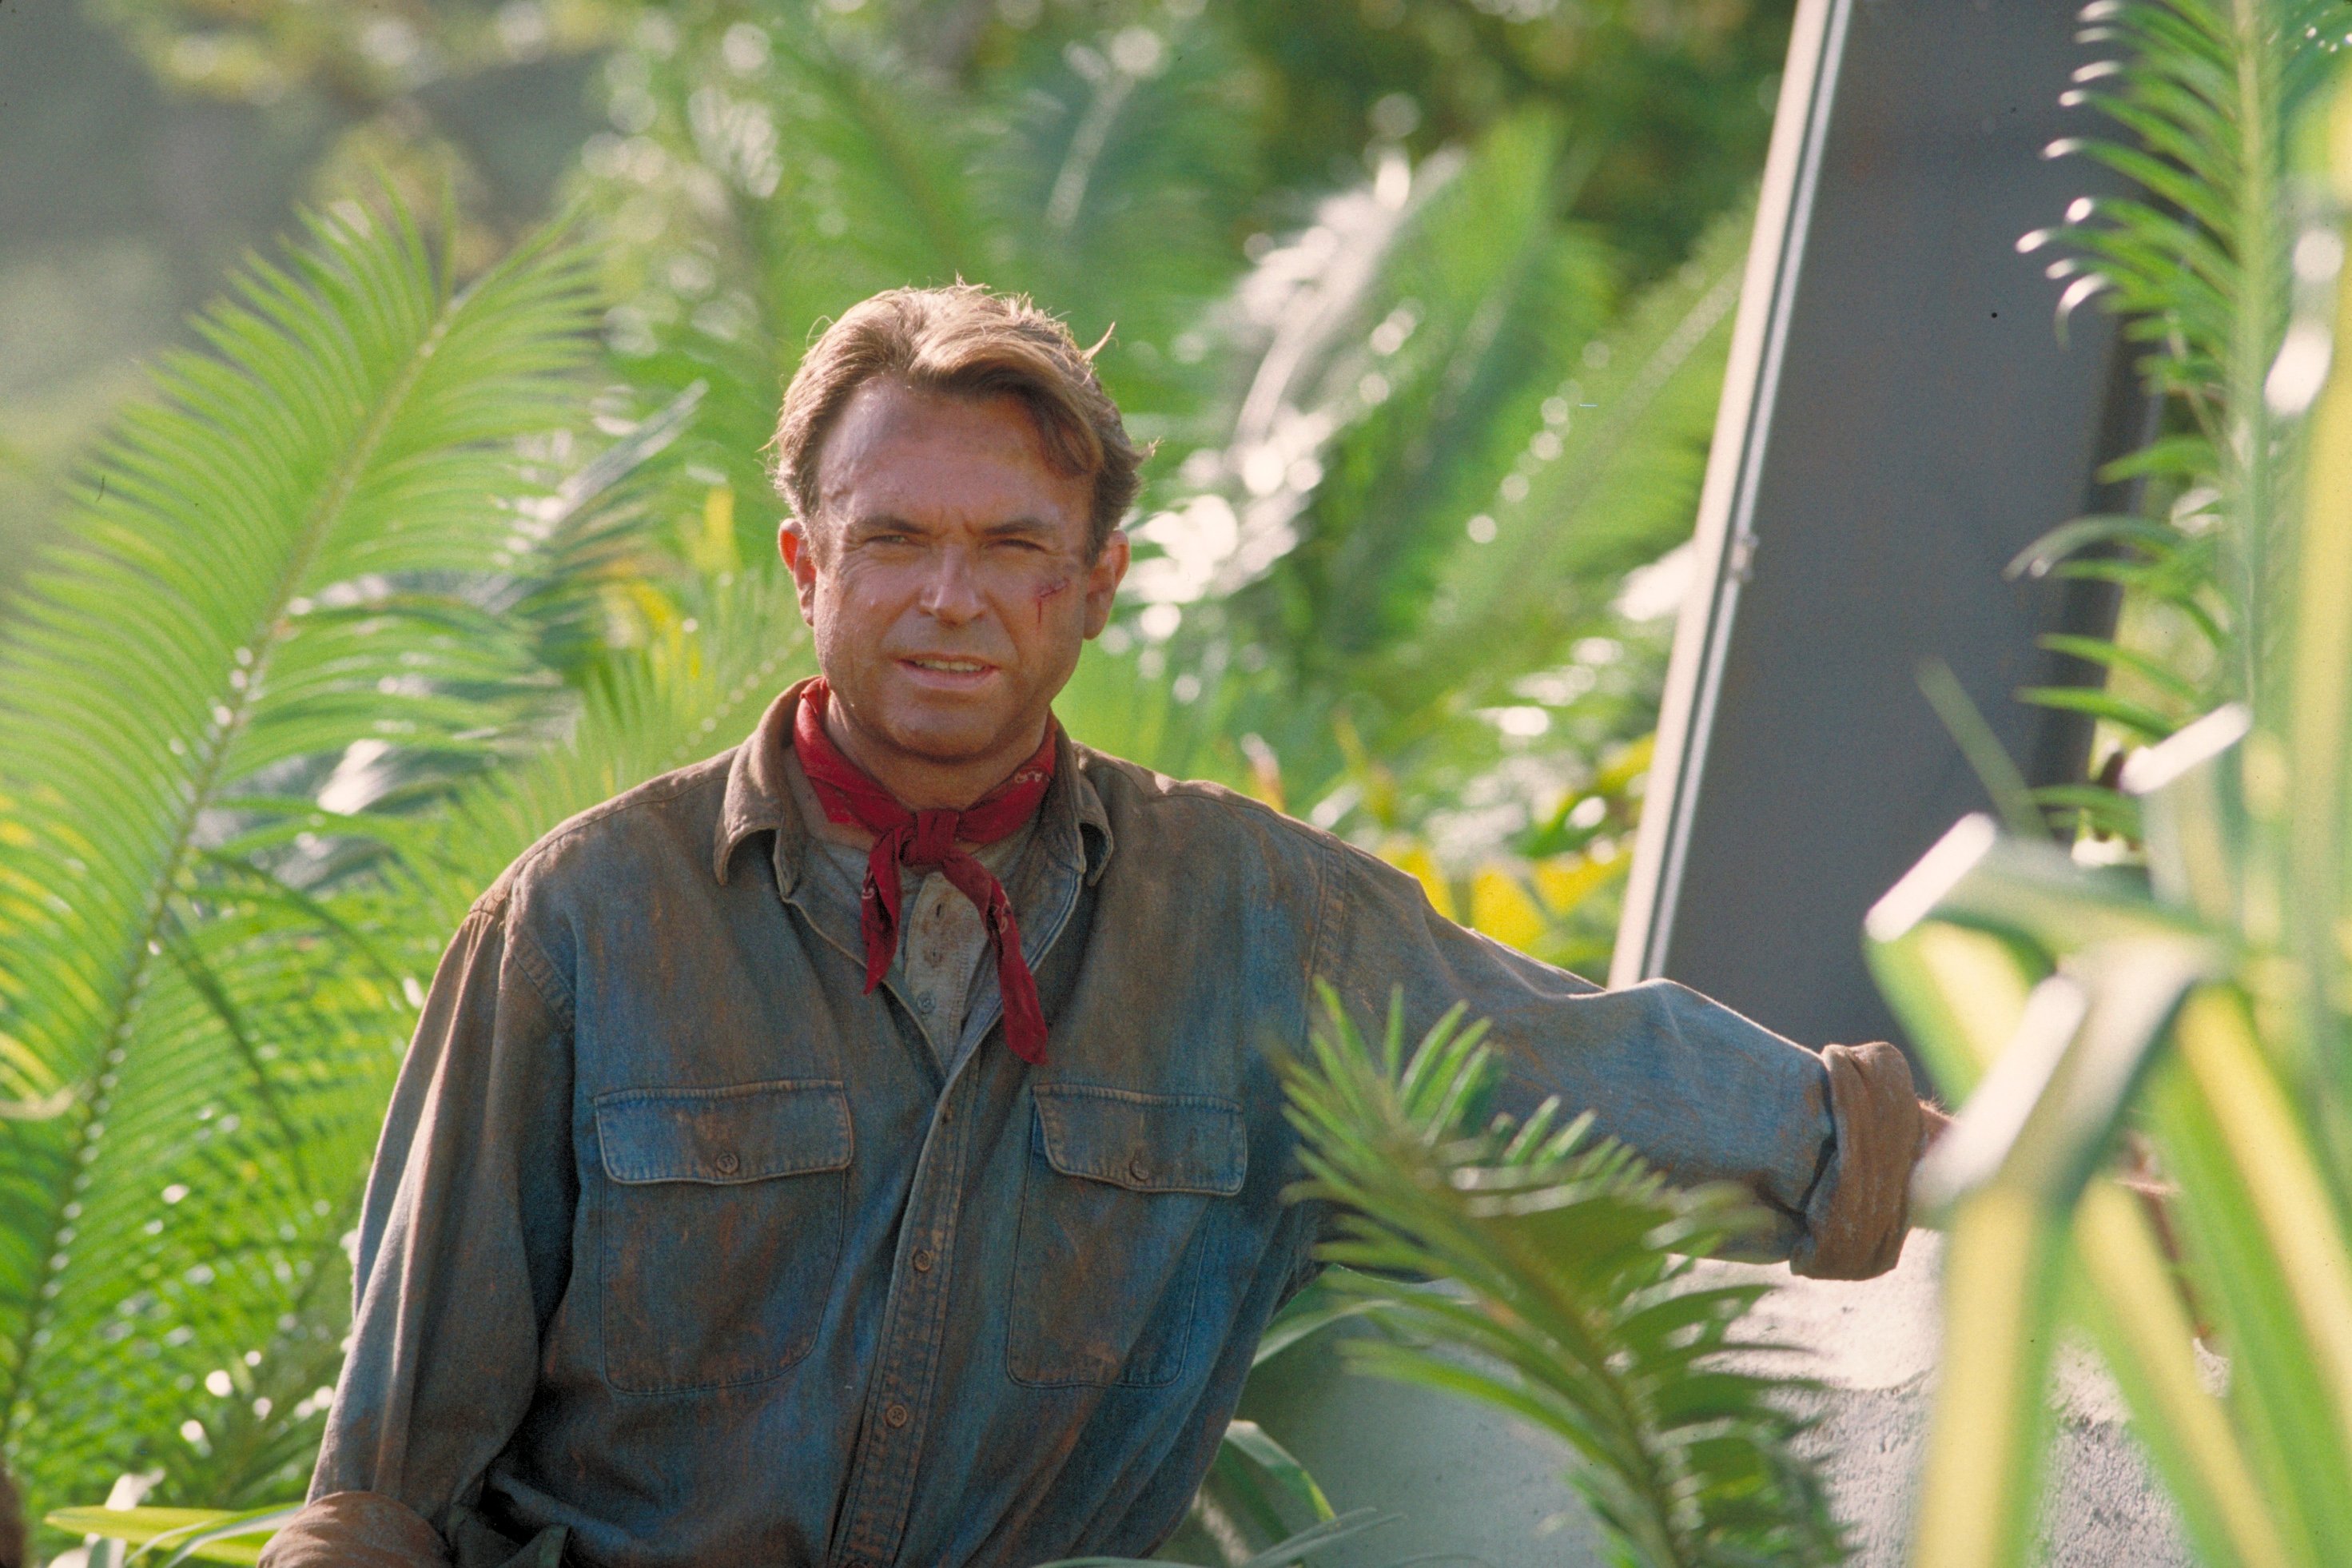 Jurassic World Dominion actor Sam Neill stands next to an electric fence as Dr. Alan Grant in Jurassic Park